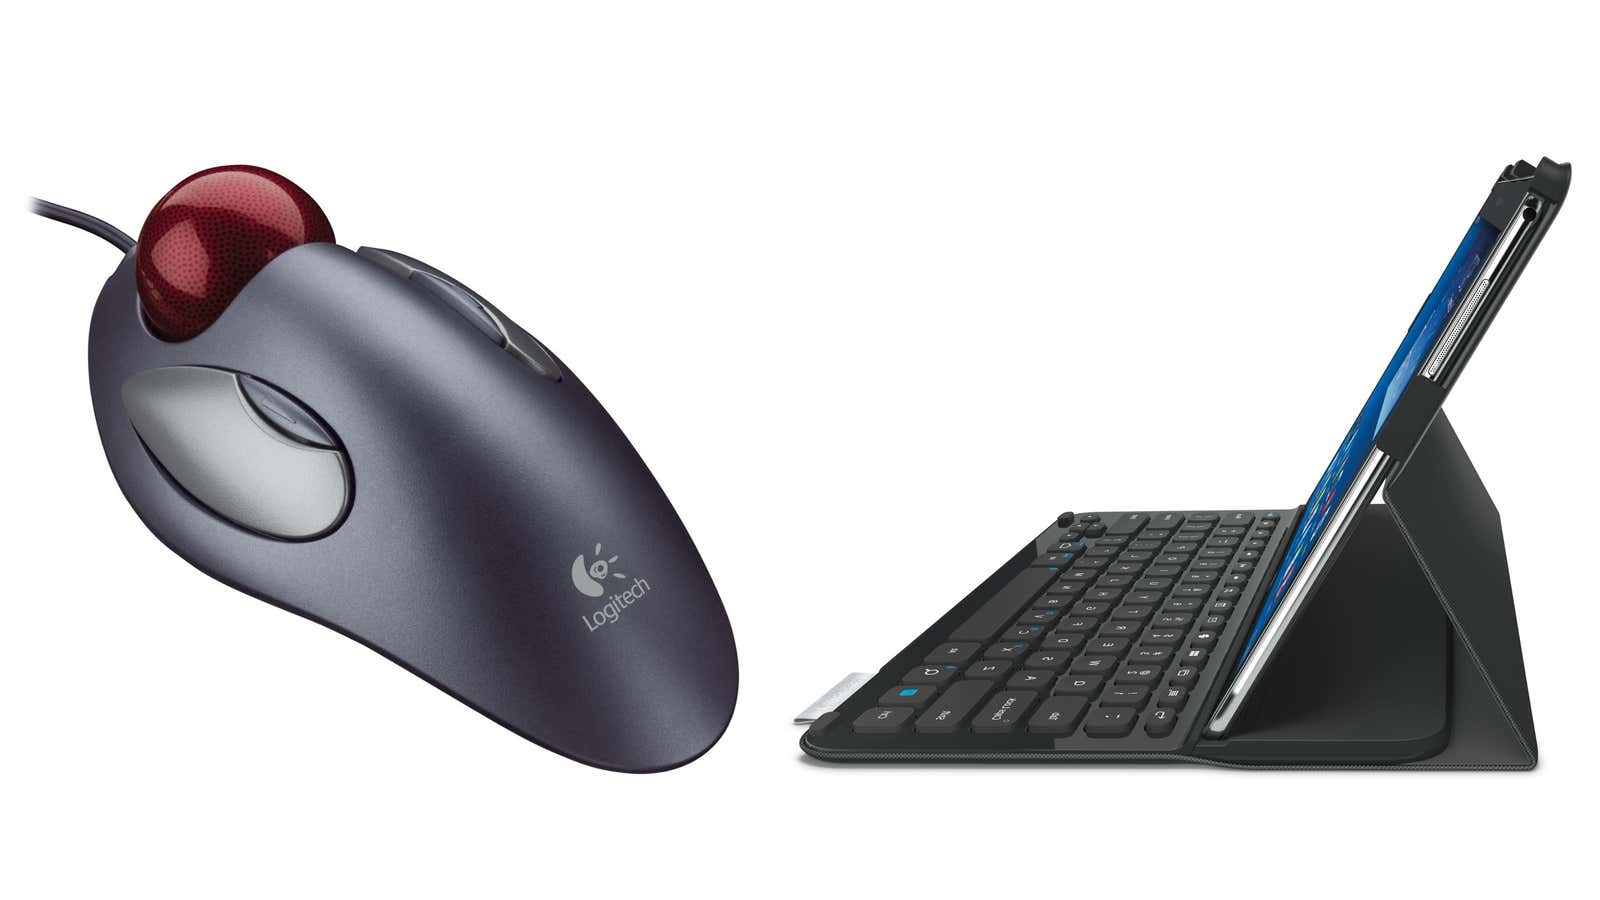 Logitech still sells plenty of mice, but tablets represent an entirely new source of revenue.